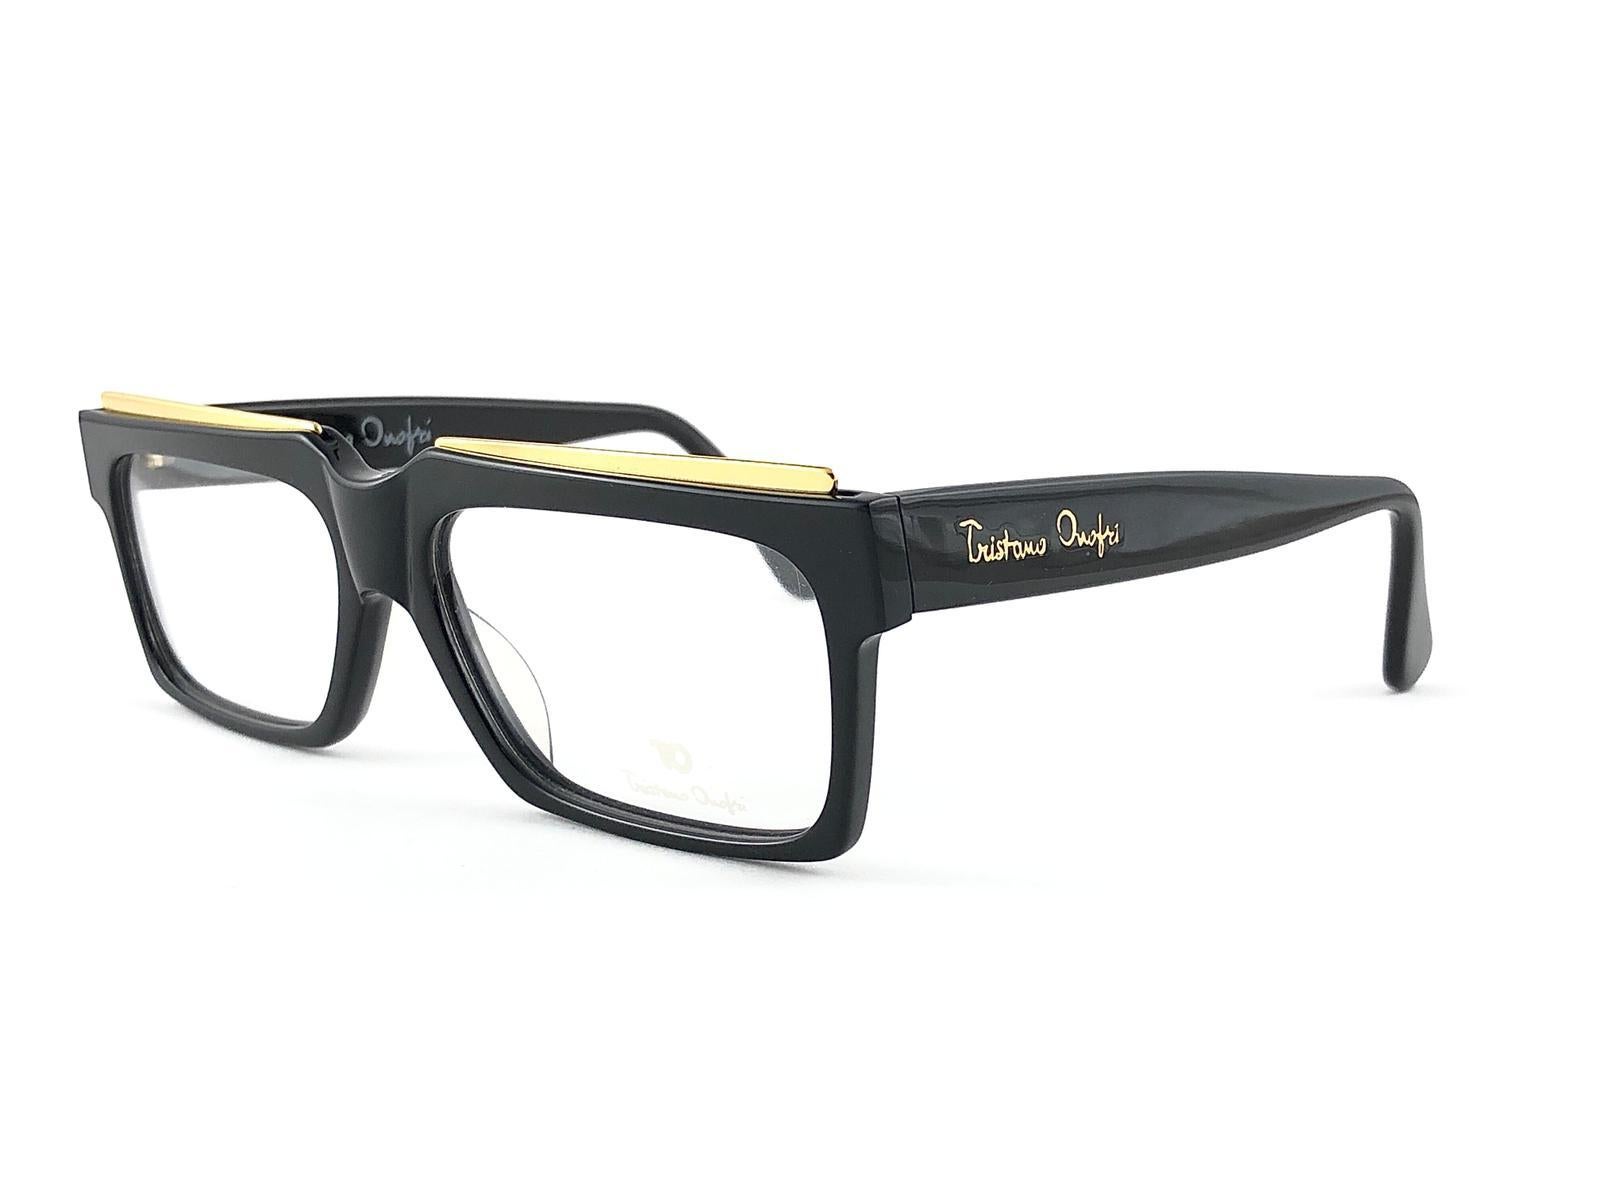 New vintage Tristano Onofri RX Glasses

Classy and timeless black and gold frame ready for your prescription lenses. 

New, never worn or displayed, it may show minor sign of wear due to storage

 Made in Italy.

FRONT :  14 CMS
LENS HEIGHT :  3.2